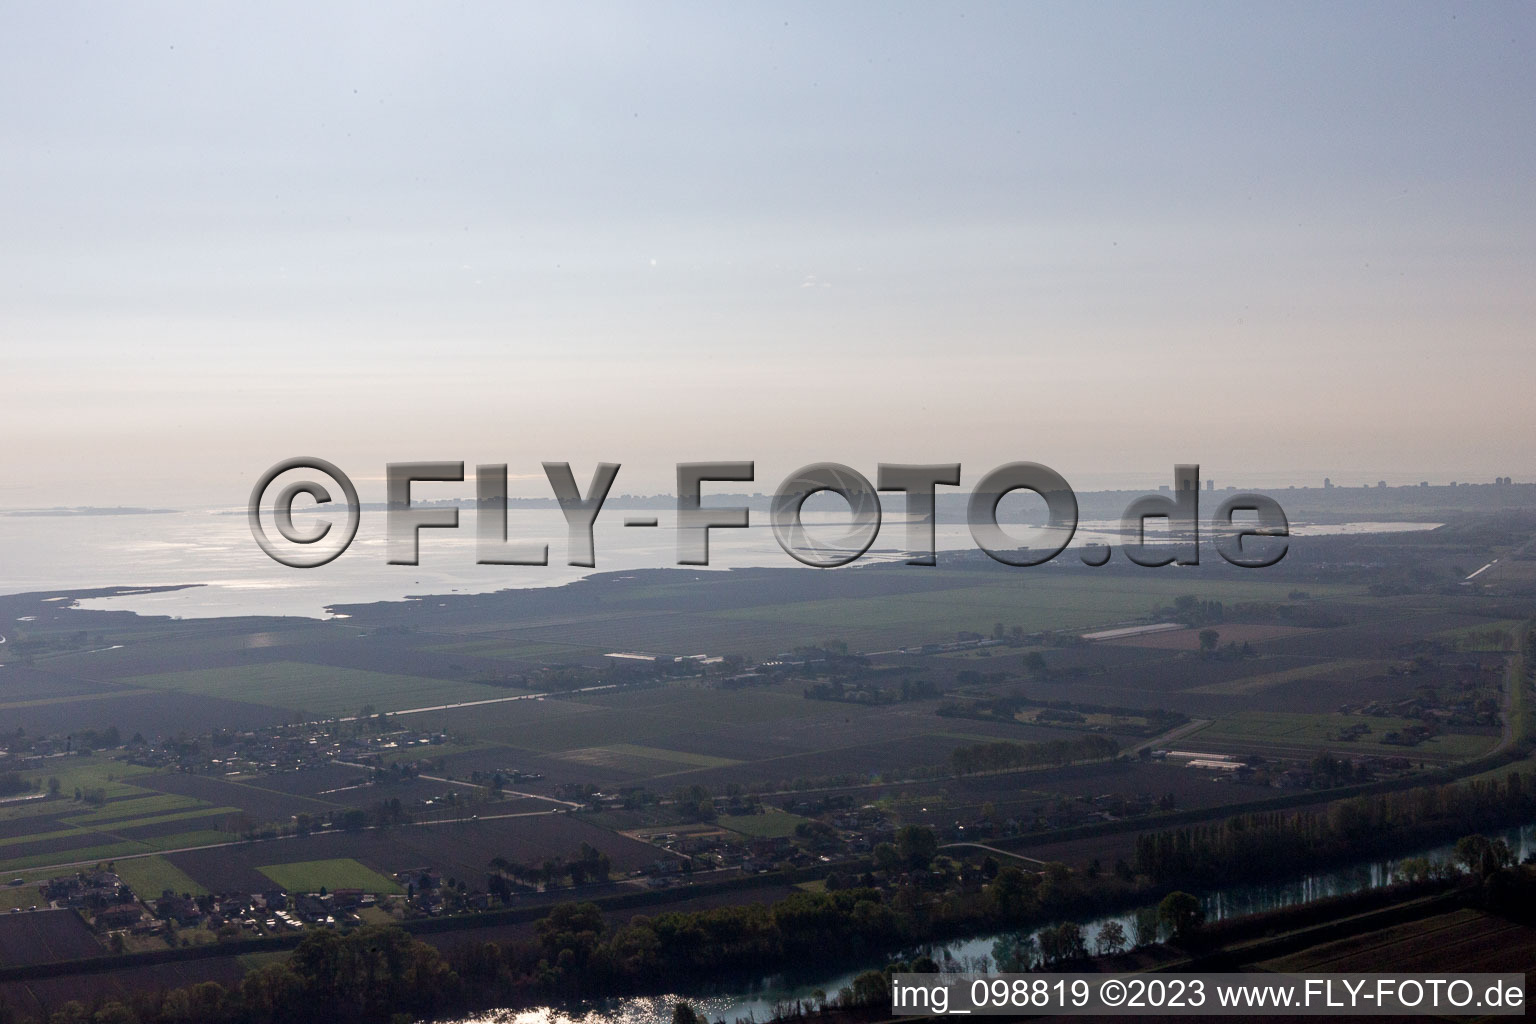 Cesarolo in the state Veneto, Italy out of the air